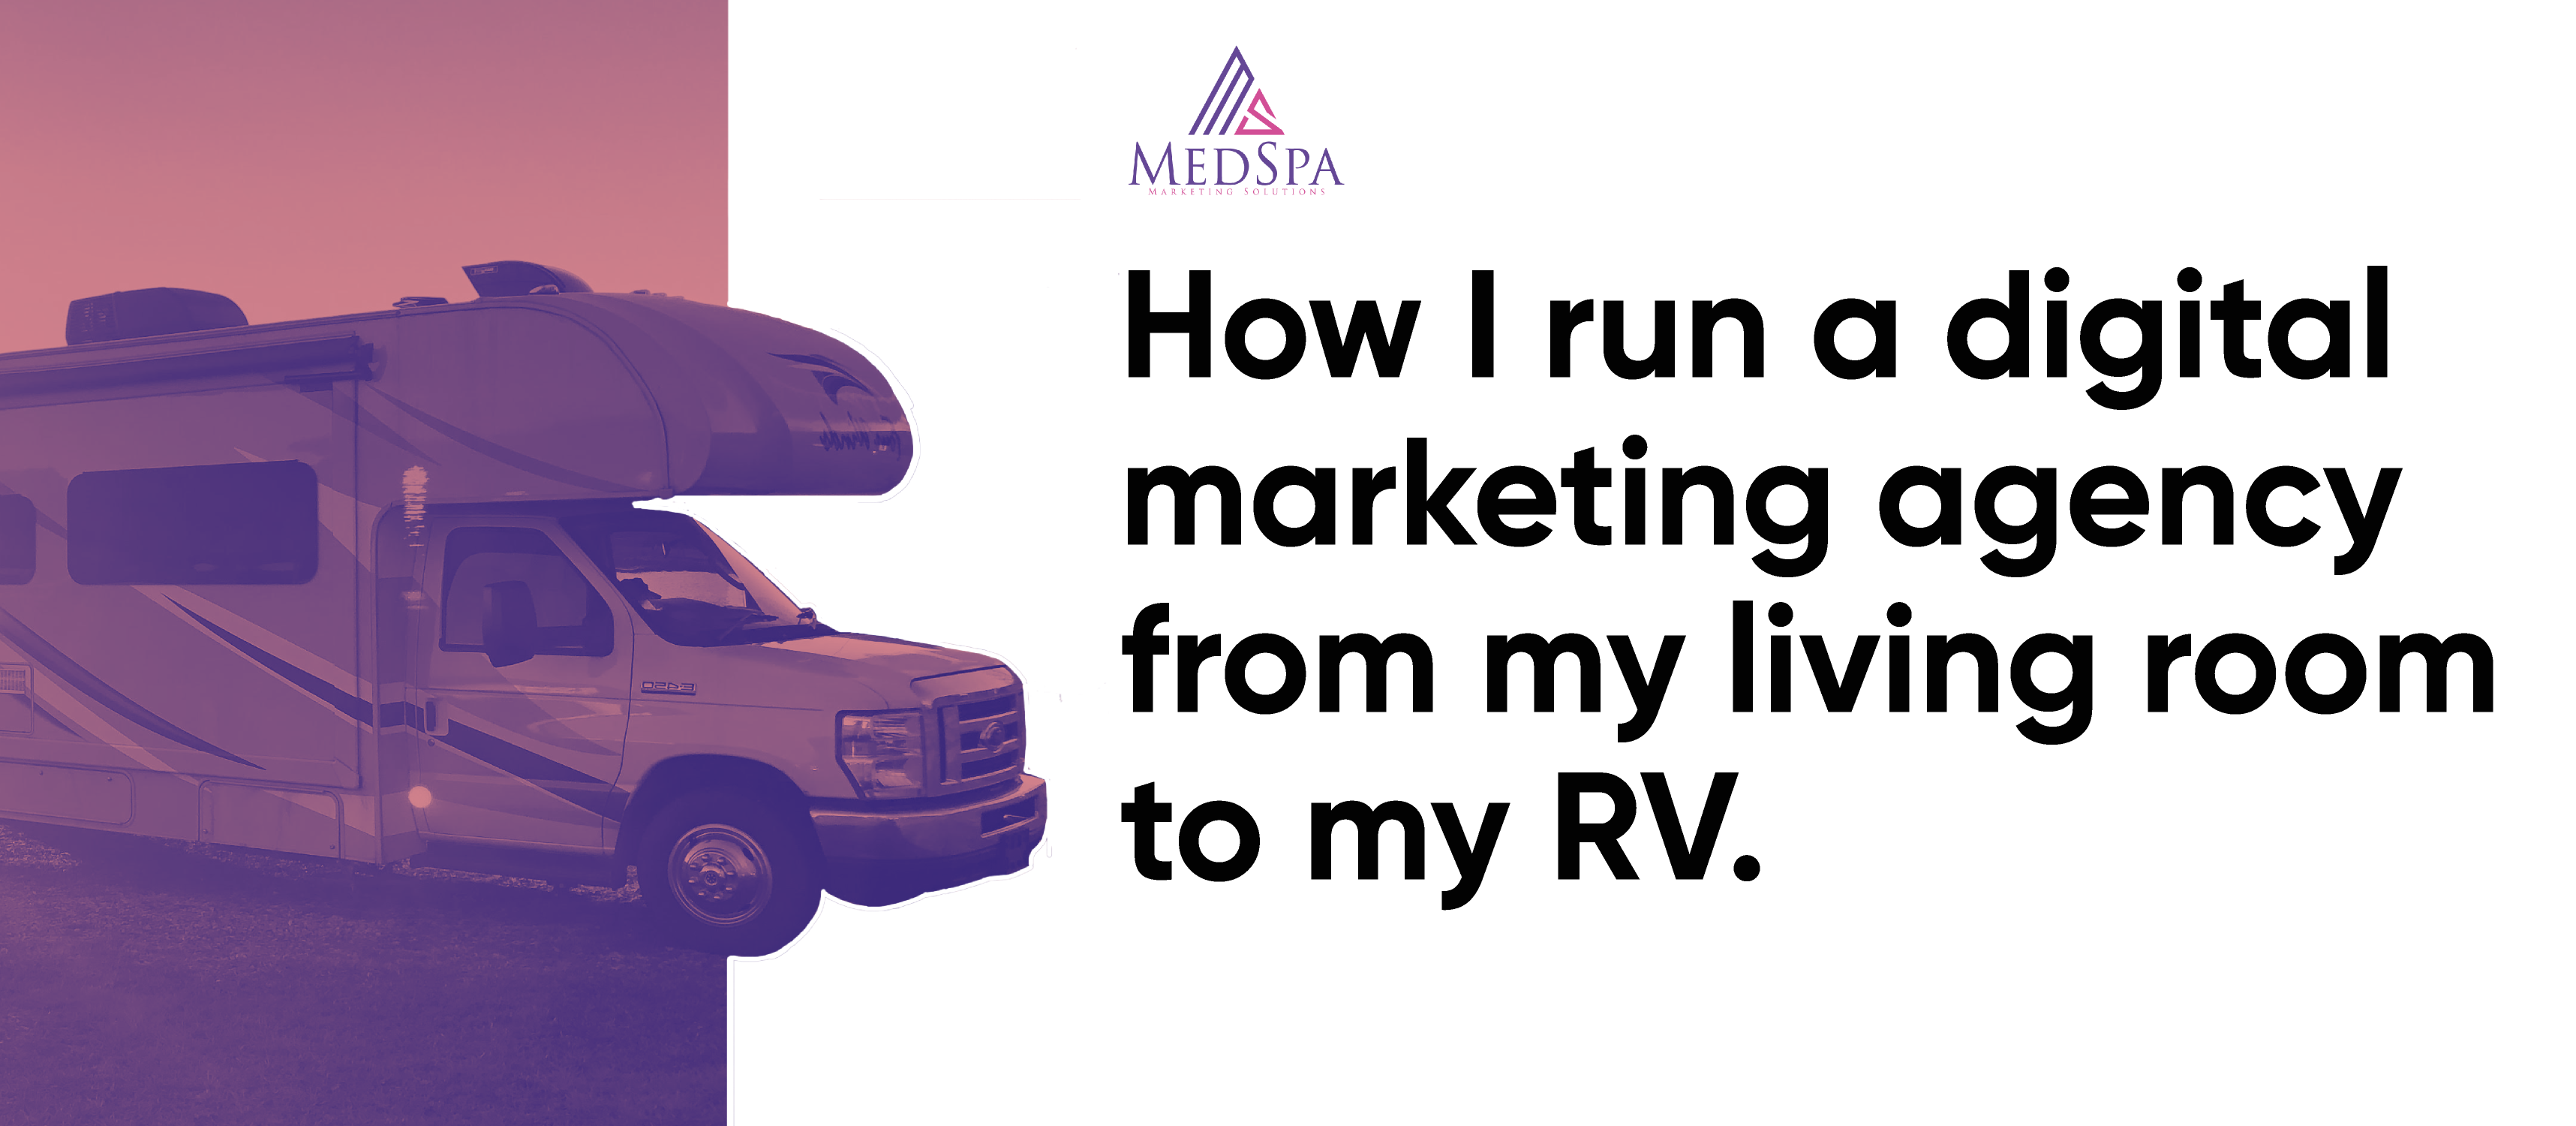 How I run a digital marketing agency, from my living room to my RV.